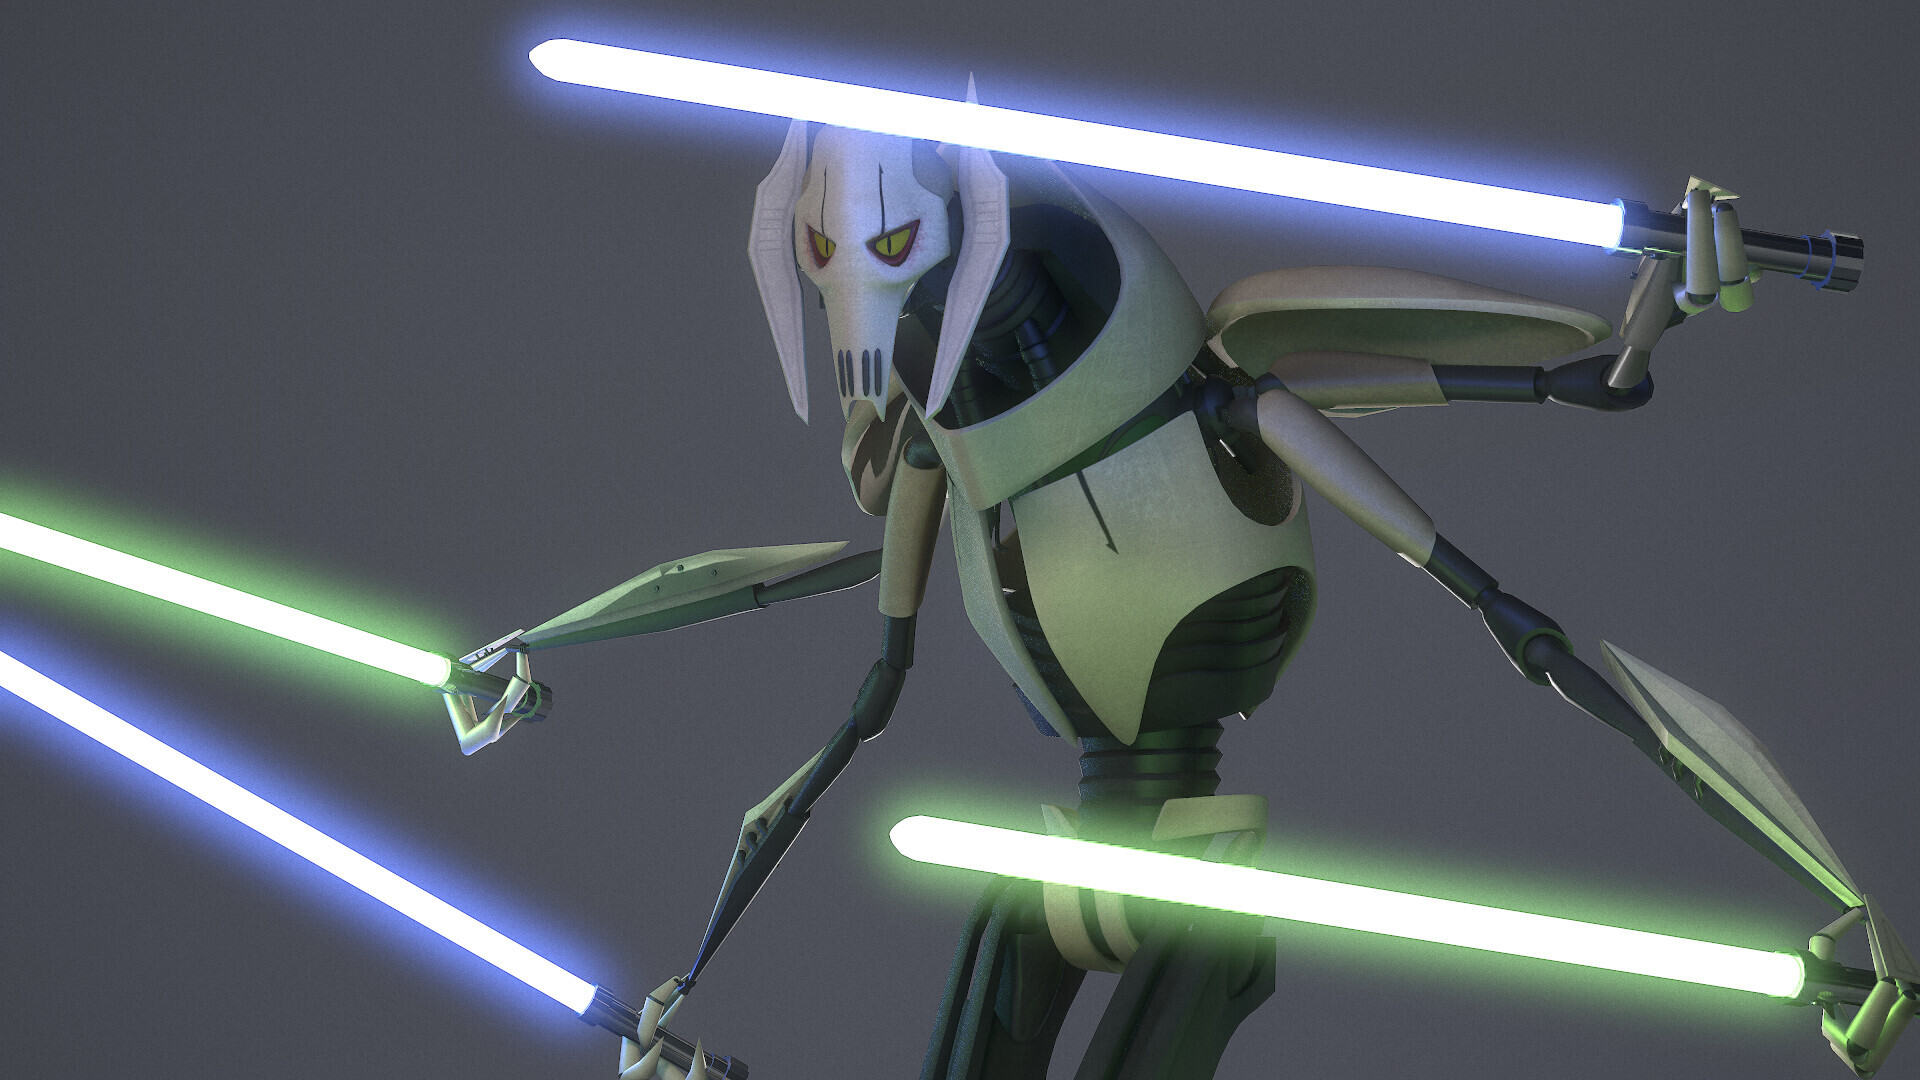 General Grievous: A cyborg general for the Separatist army, Four arms and the ability to wield Lightsabers. 1920x1080 Full HD Background.